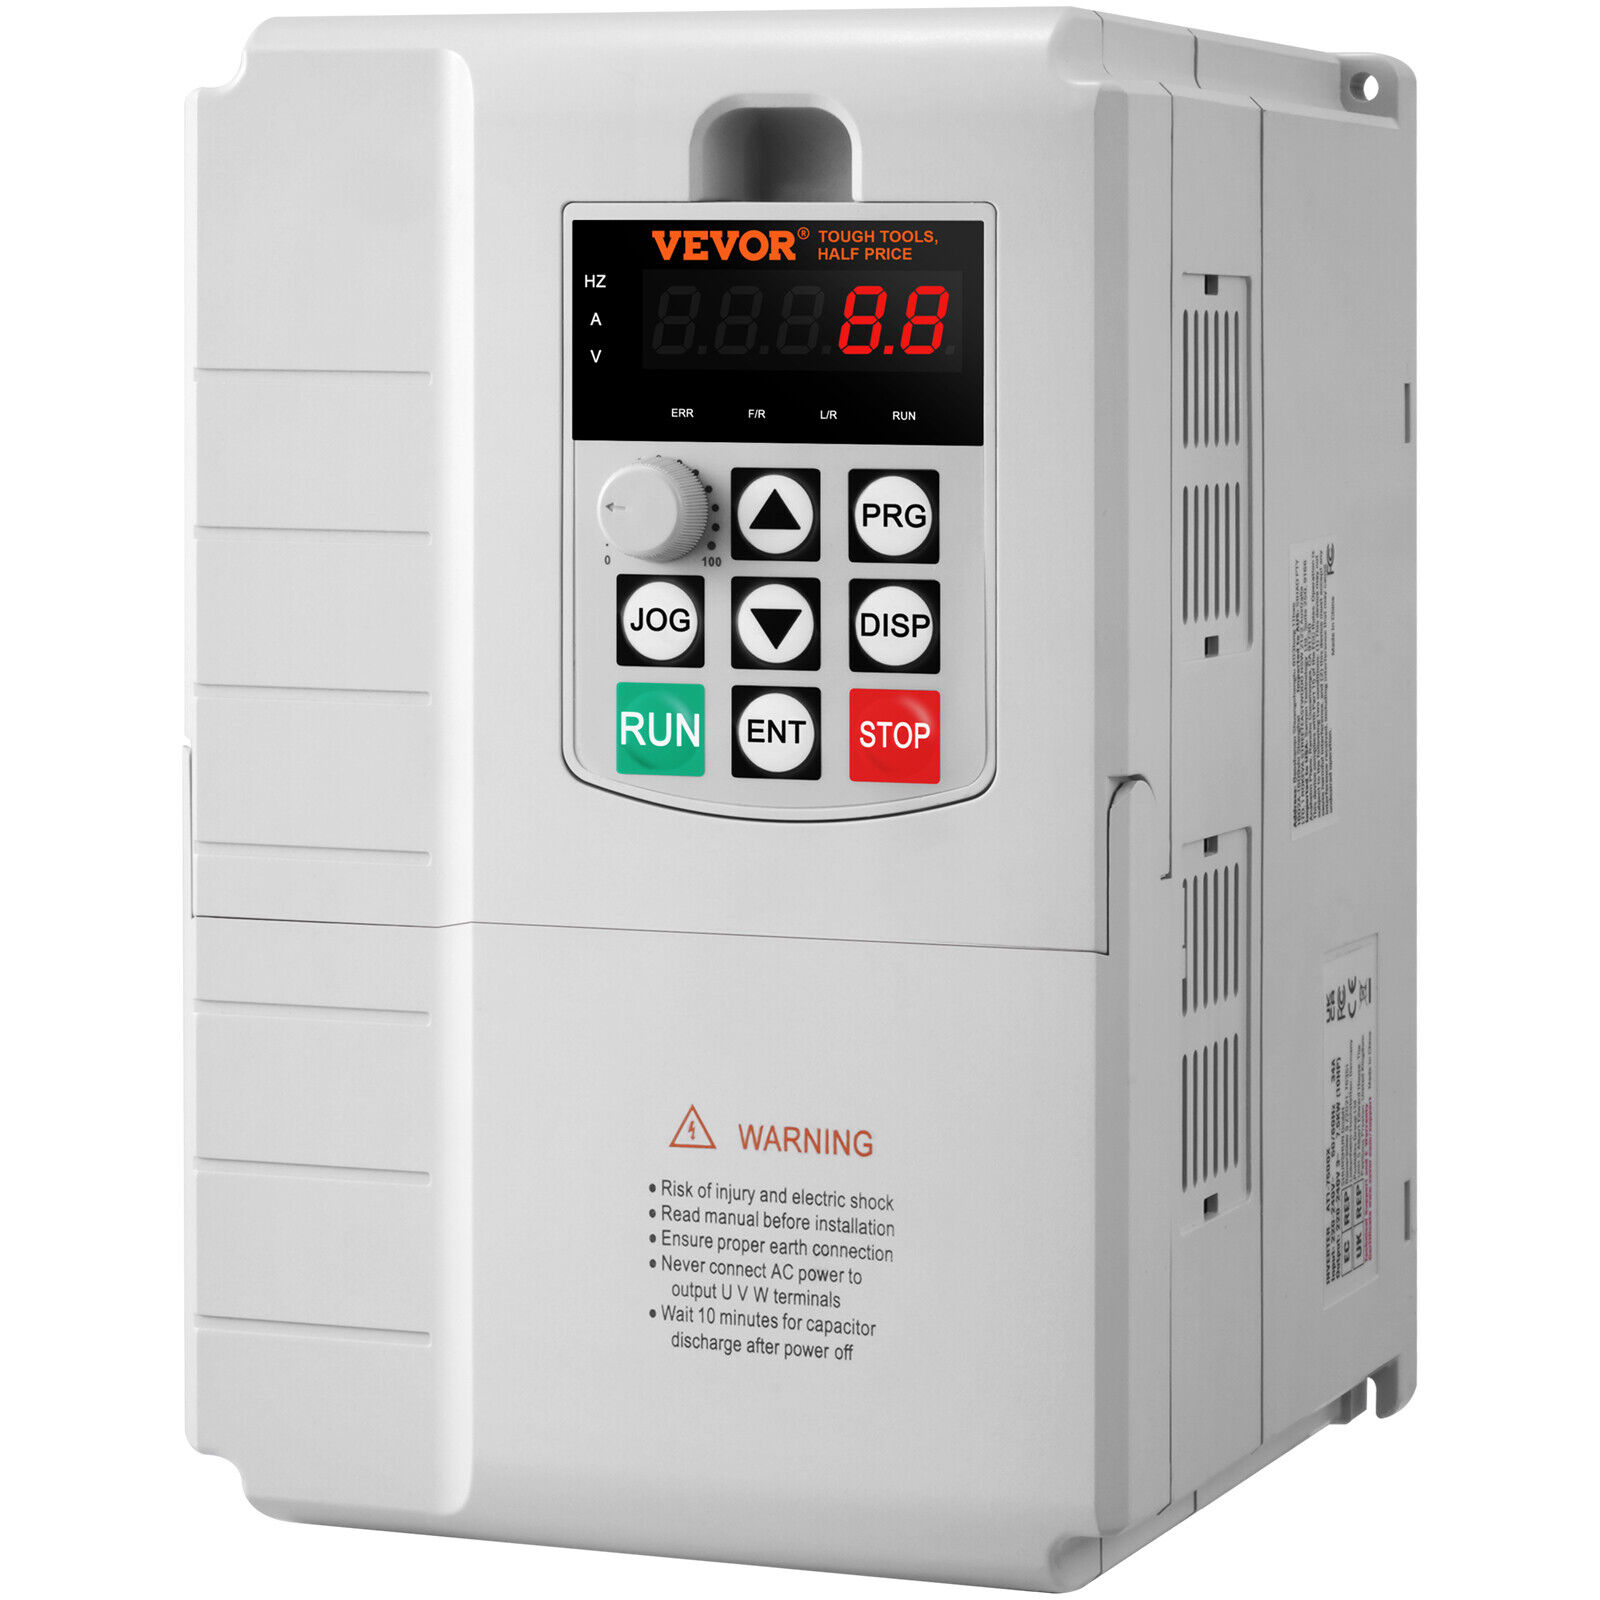 VEVOR 7.5KW 10HP VFD Variable Frequency Drive for 3-Phase Motor Speed Control